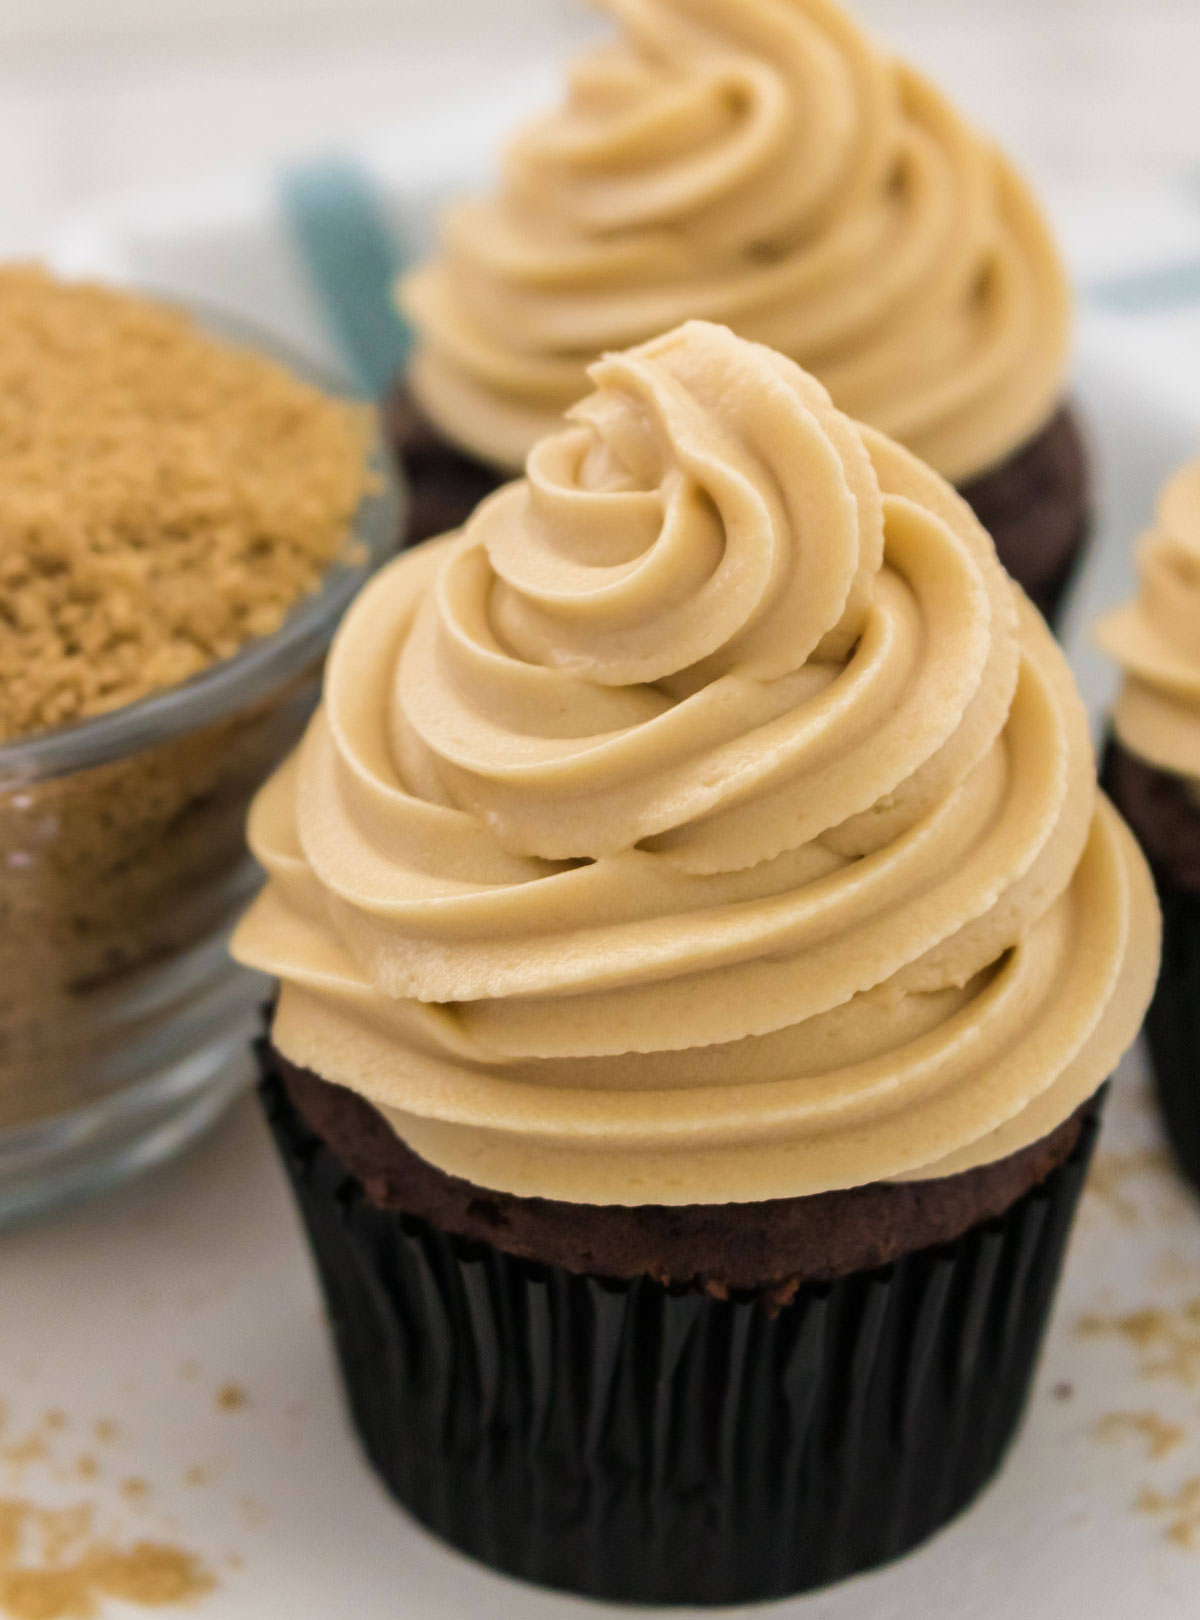 Closeup of a chocolate cupcake topped with The Best Brown Sugar Cream Cheese Frosting sitting next to a bowl of brown sugar.